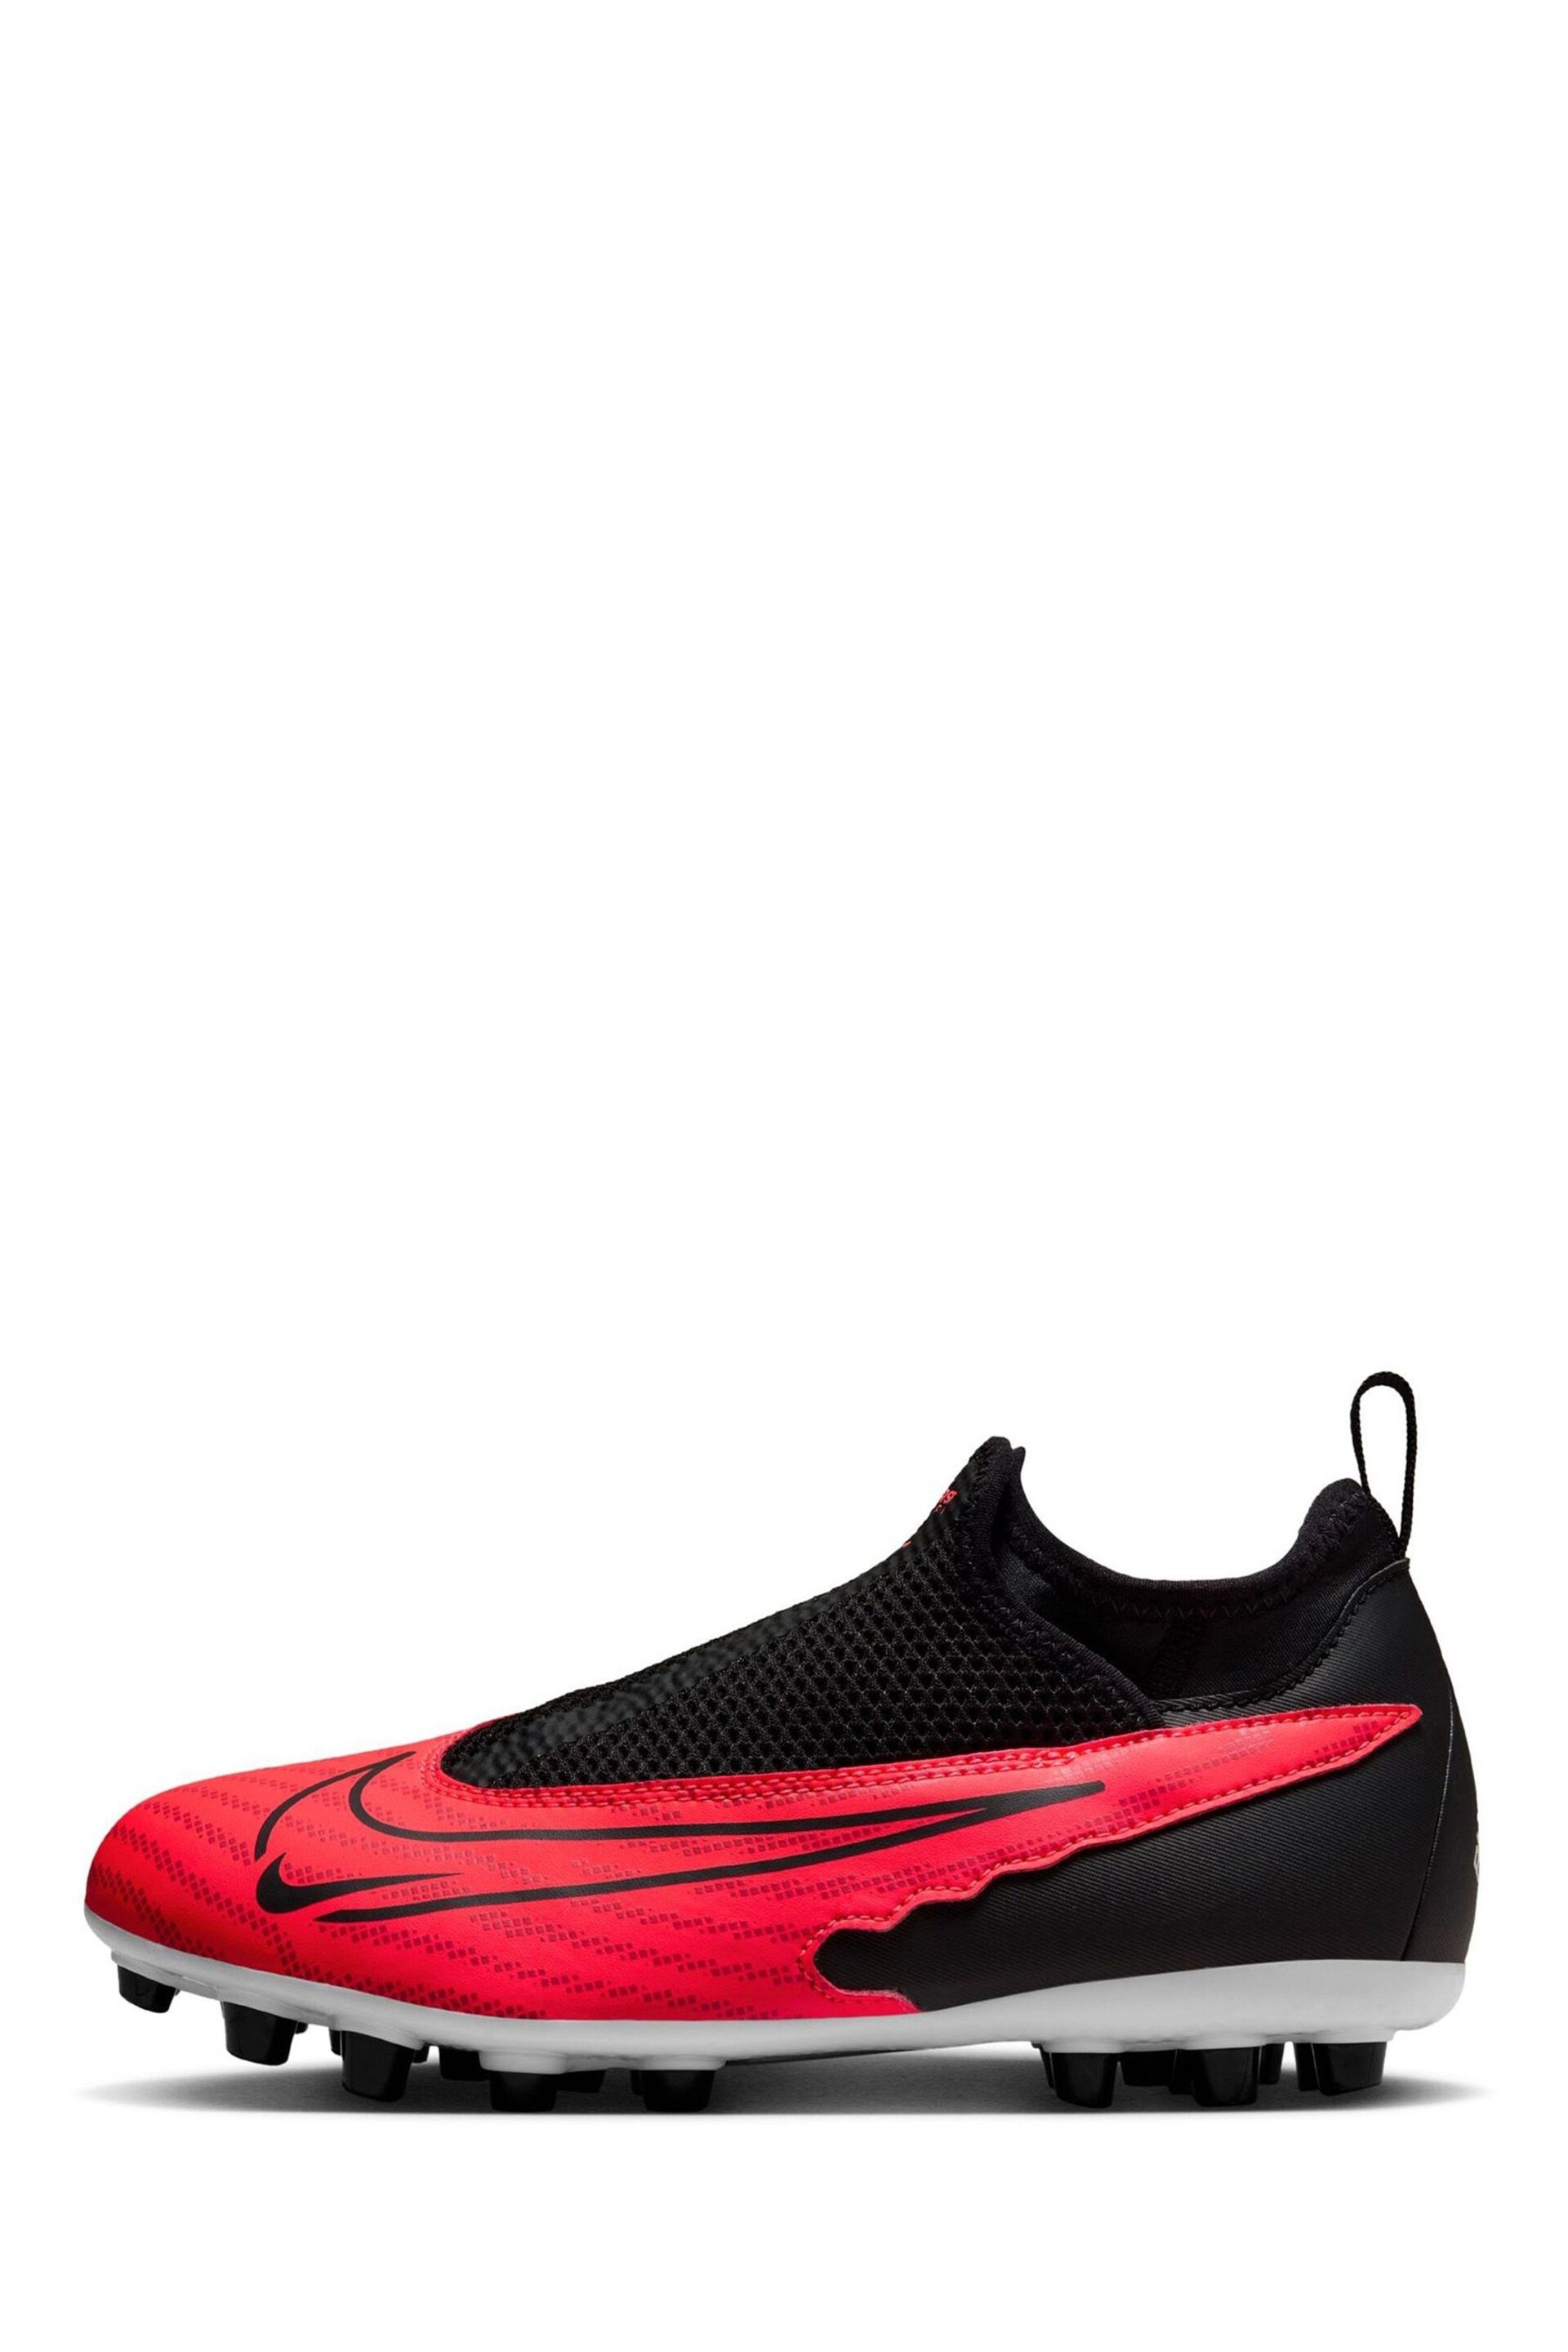 Nike Red Jr. Phantom Dynamic Artificial Ground Football Boots - Image 2 of 12